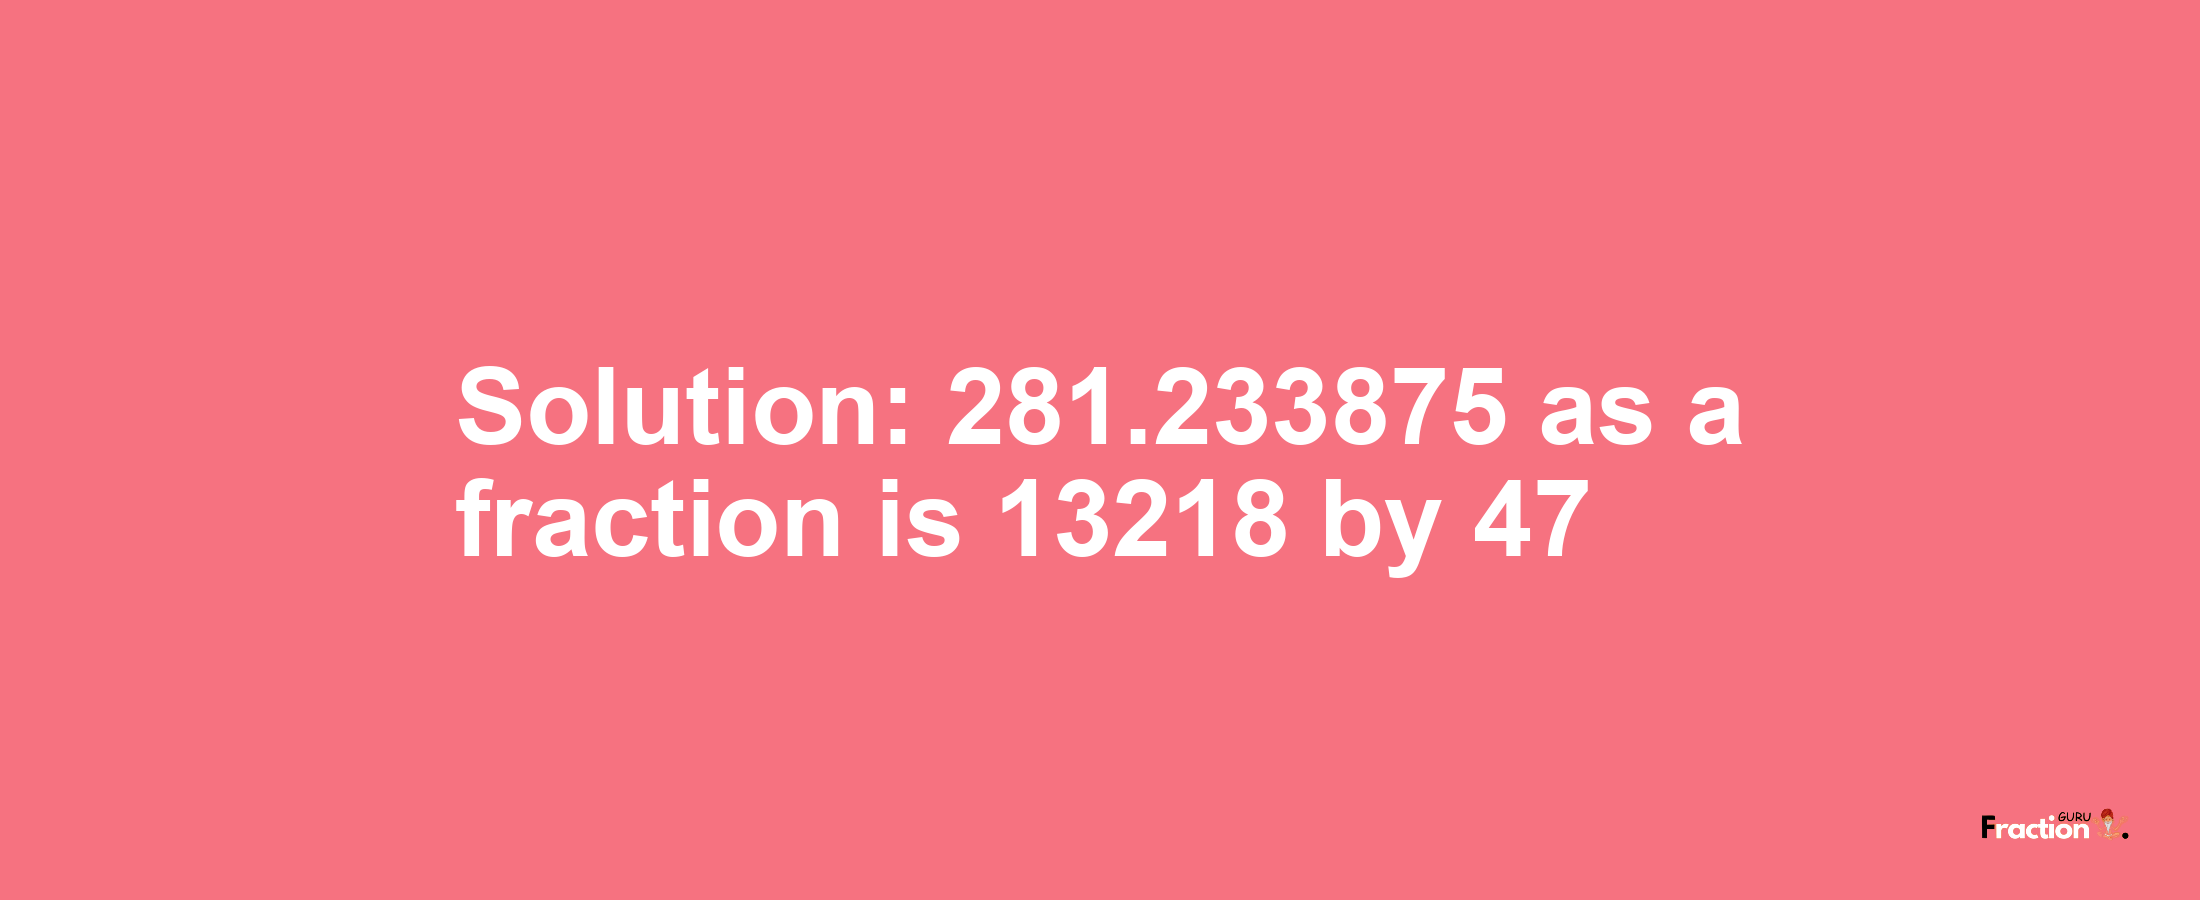 Solution:281.233875 as a fraction is 13218/47